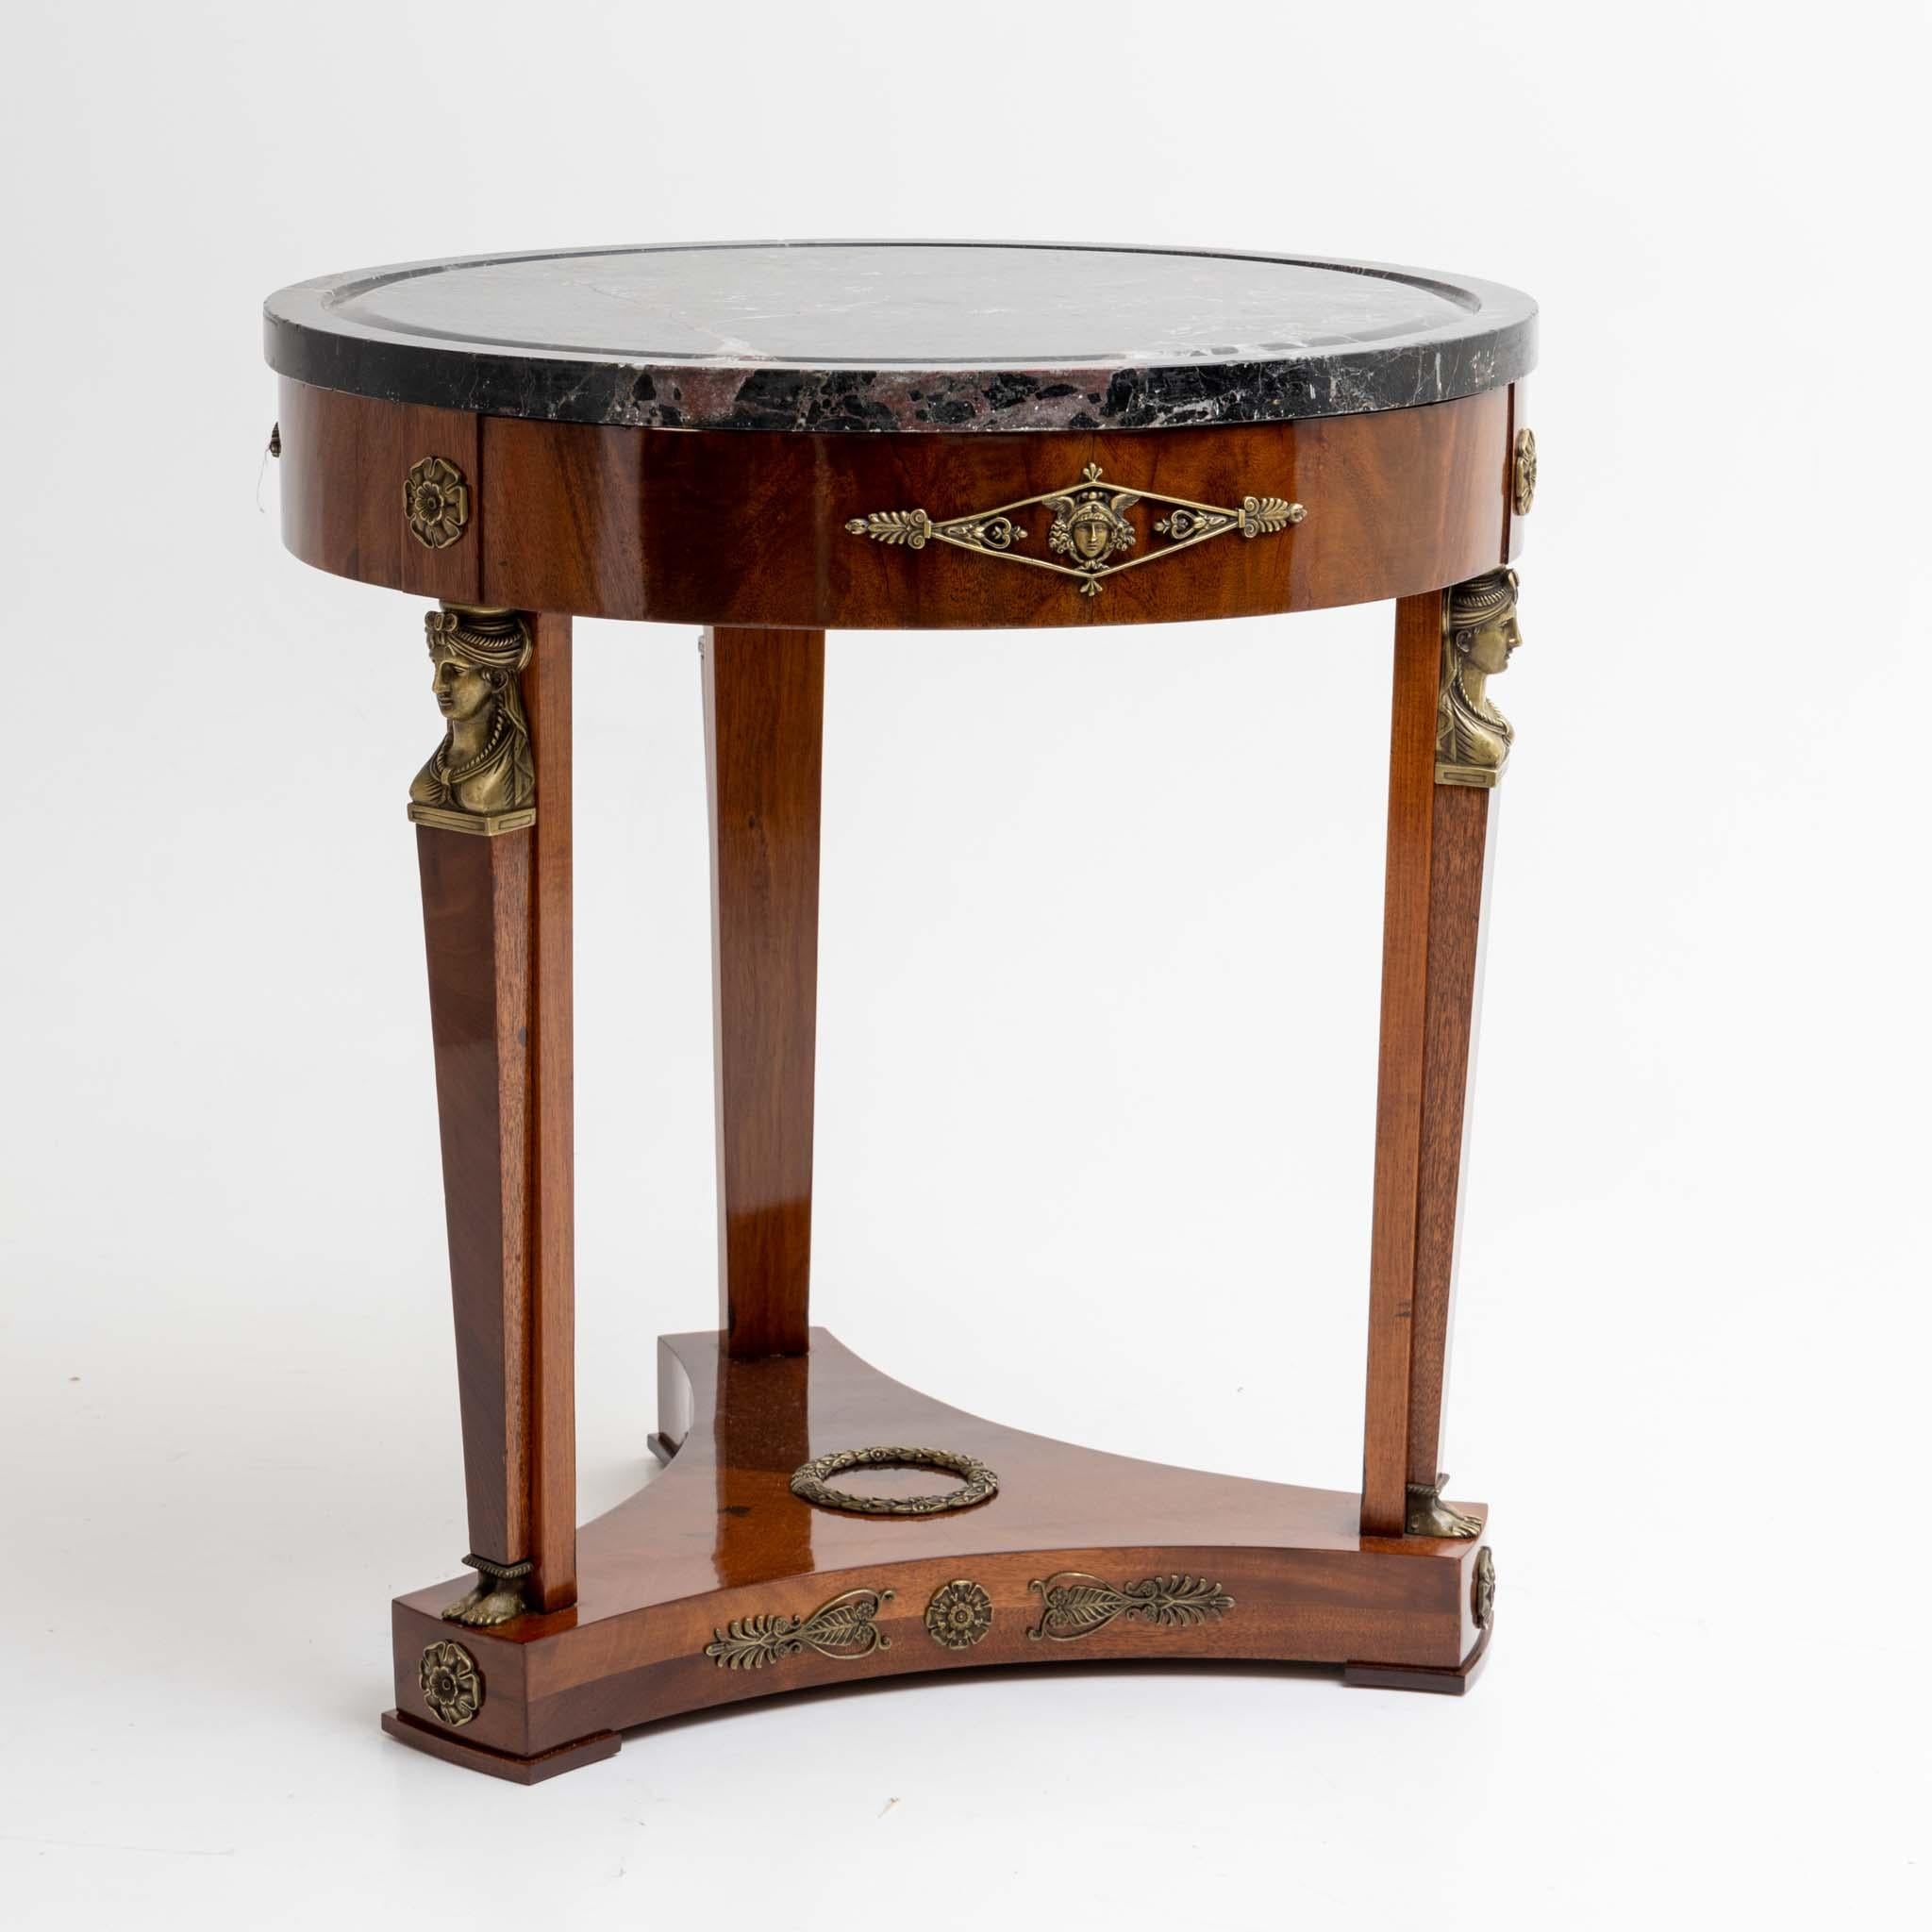 Empire style gueridon with three legs and trefoil base. The legs are decorated with caryatid-herms. The tabletop is made of a dark gray marble with red veins and the smooth frame as well as the pedestal are adorned with other Empire style fittings.